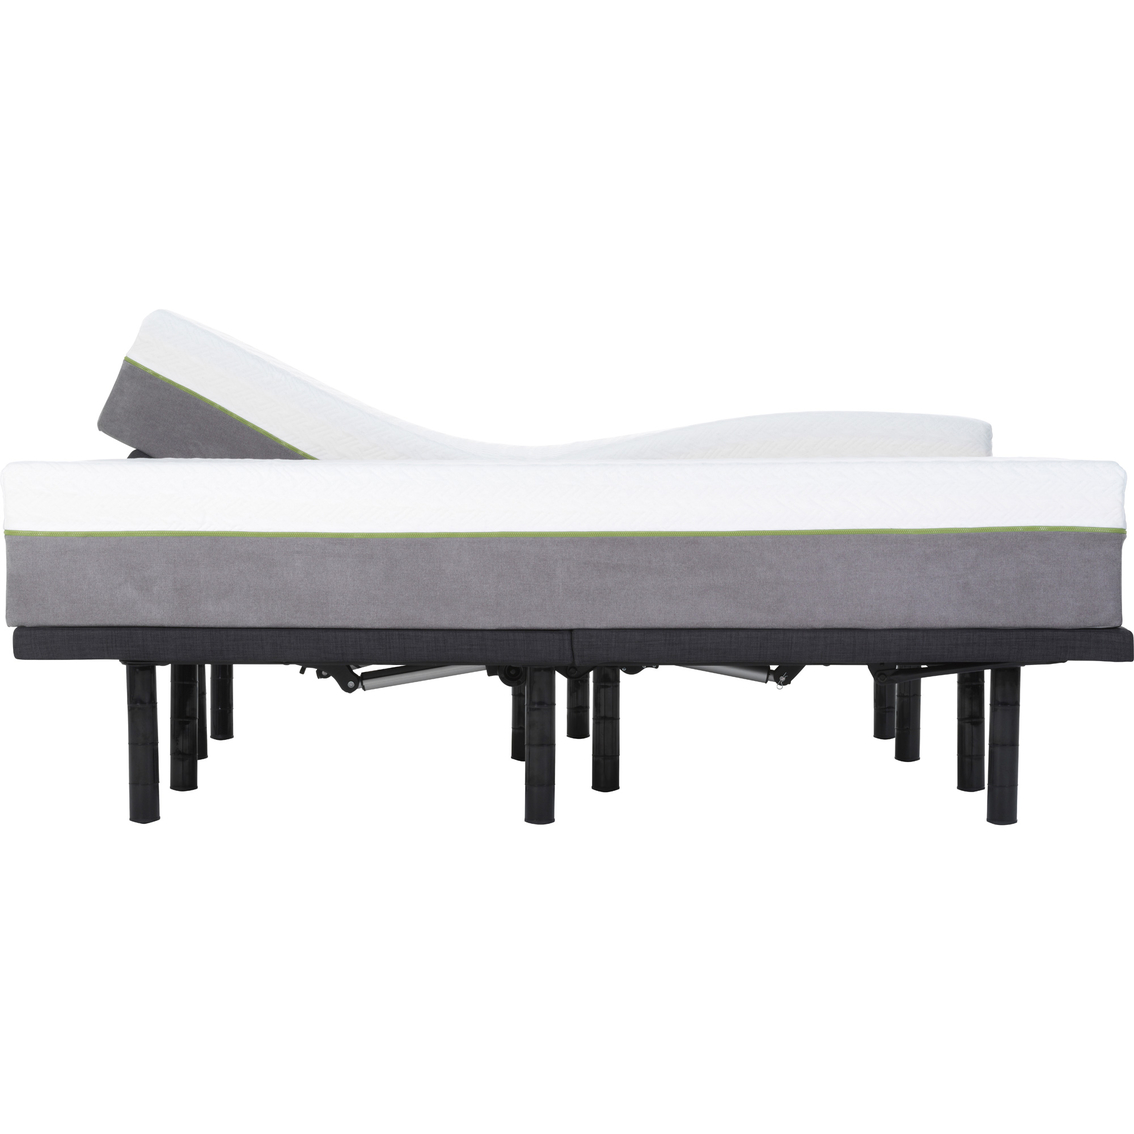 Motion Trend 12 in. Copper Infused Memory Foam Mattress with M4000 Adjustable Base - Image 4 of 6